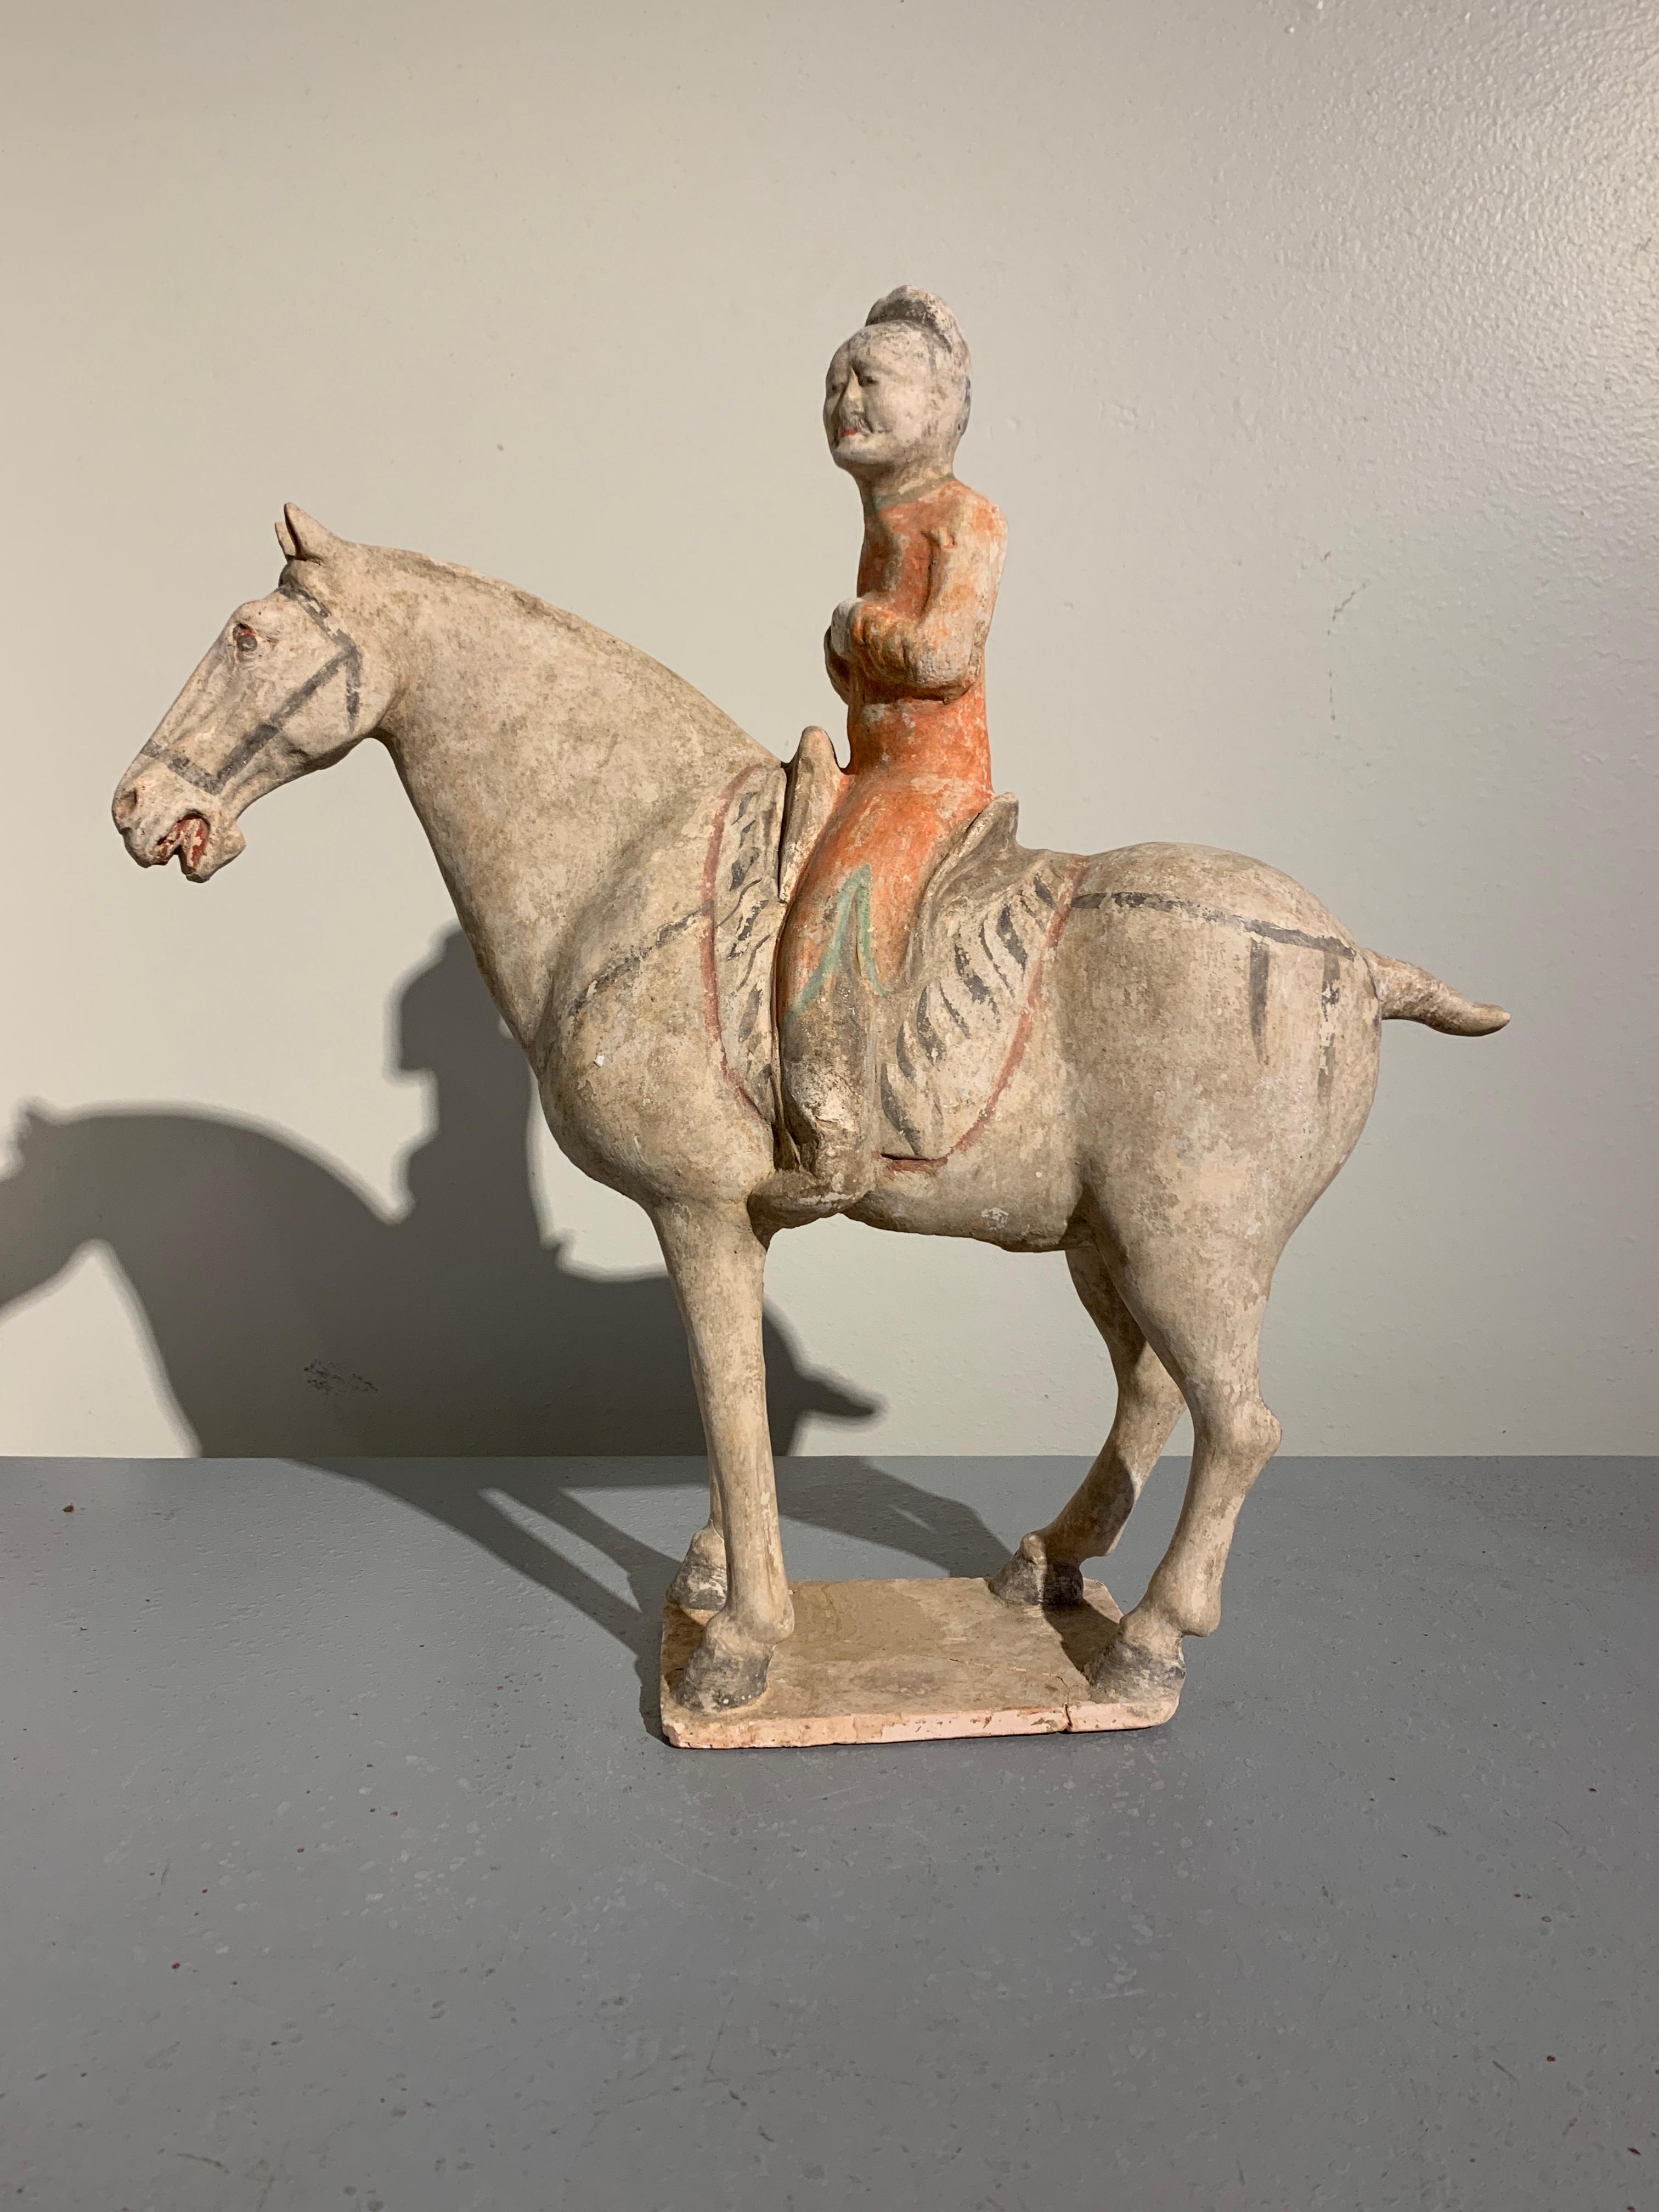 A wonderfully modeled painted pottery figure of horse and rider, Tang Dynasty (618-906 AD), circa 9th century, China. TL tested by Oxford Authentication.

A Classic representation of a Tang Dynasty horse and rider, both figures expressive, with